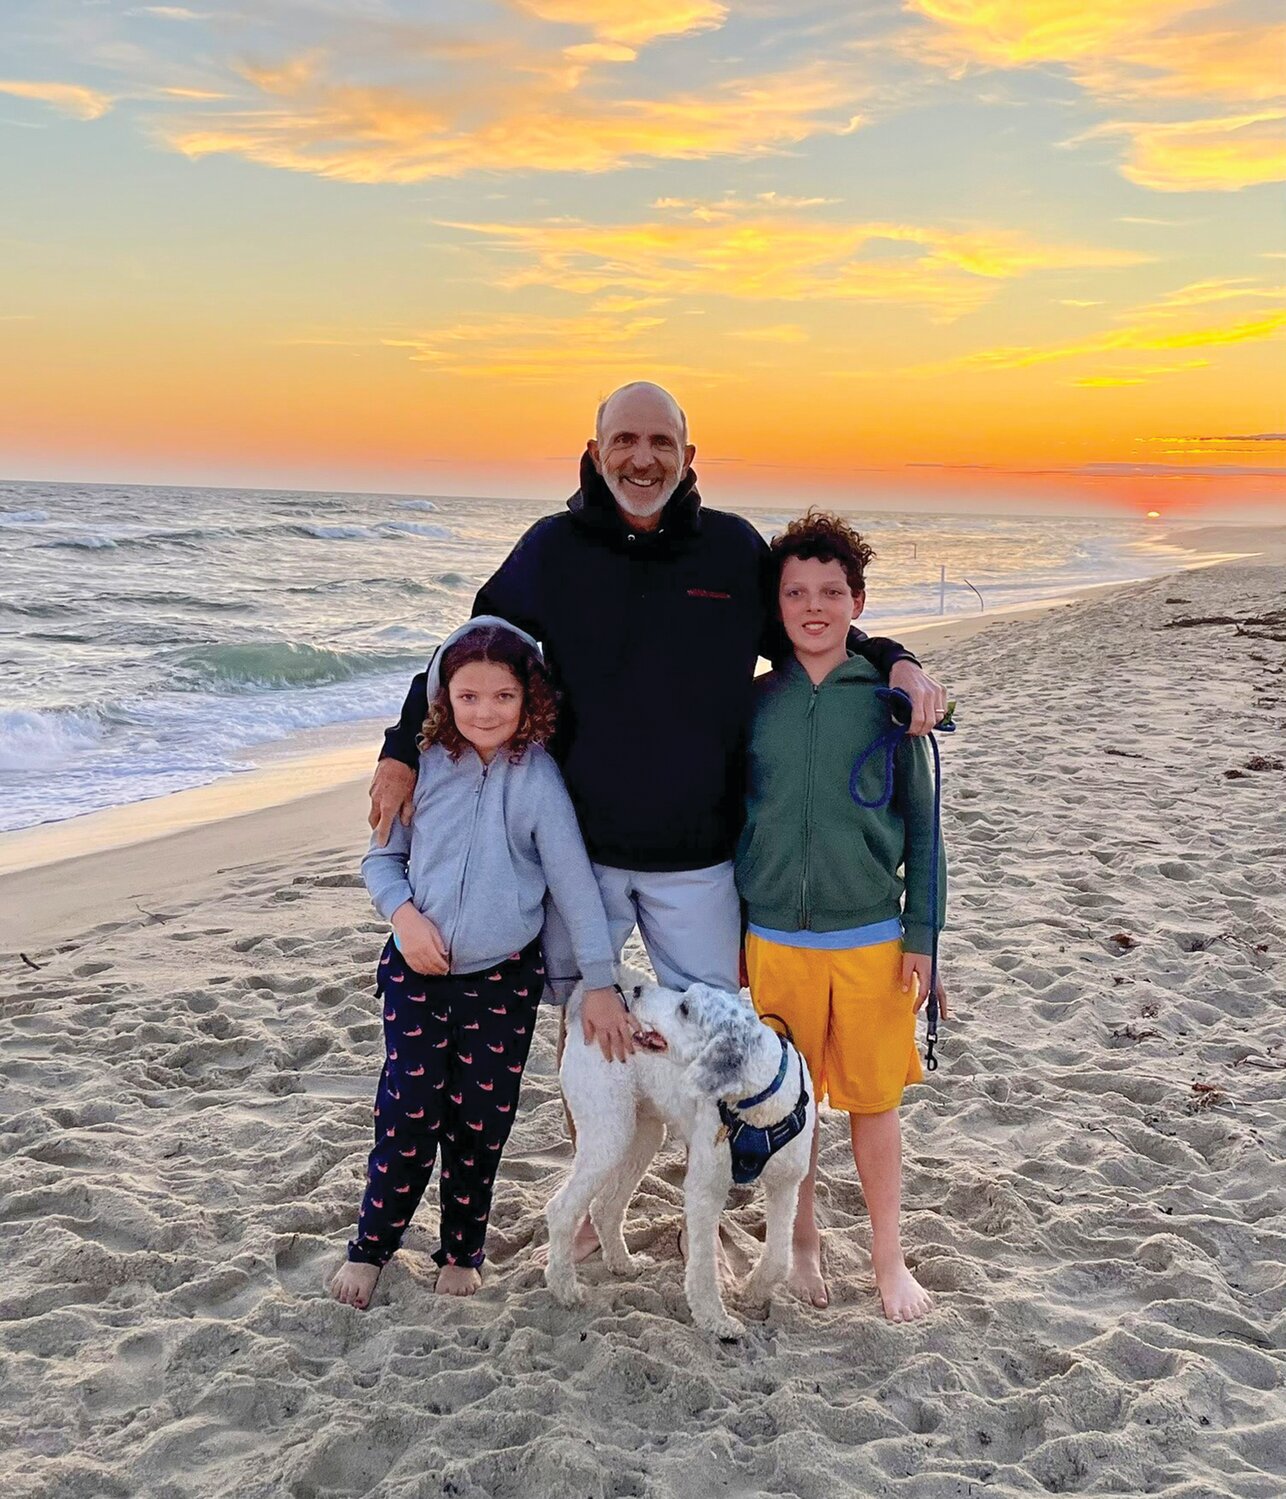 Bucks County Poet Laureate Tom Mallouk and two of his three grandchildren, along with his sheepadoodle, Nellie, enjoys the beach. Pictured are Sebastian and Aurora. Not pictured is a third grandchild, Lukas.